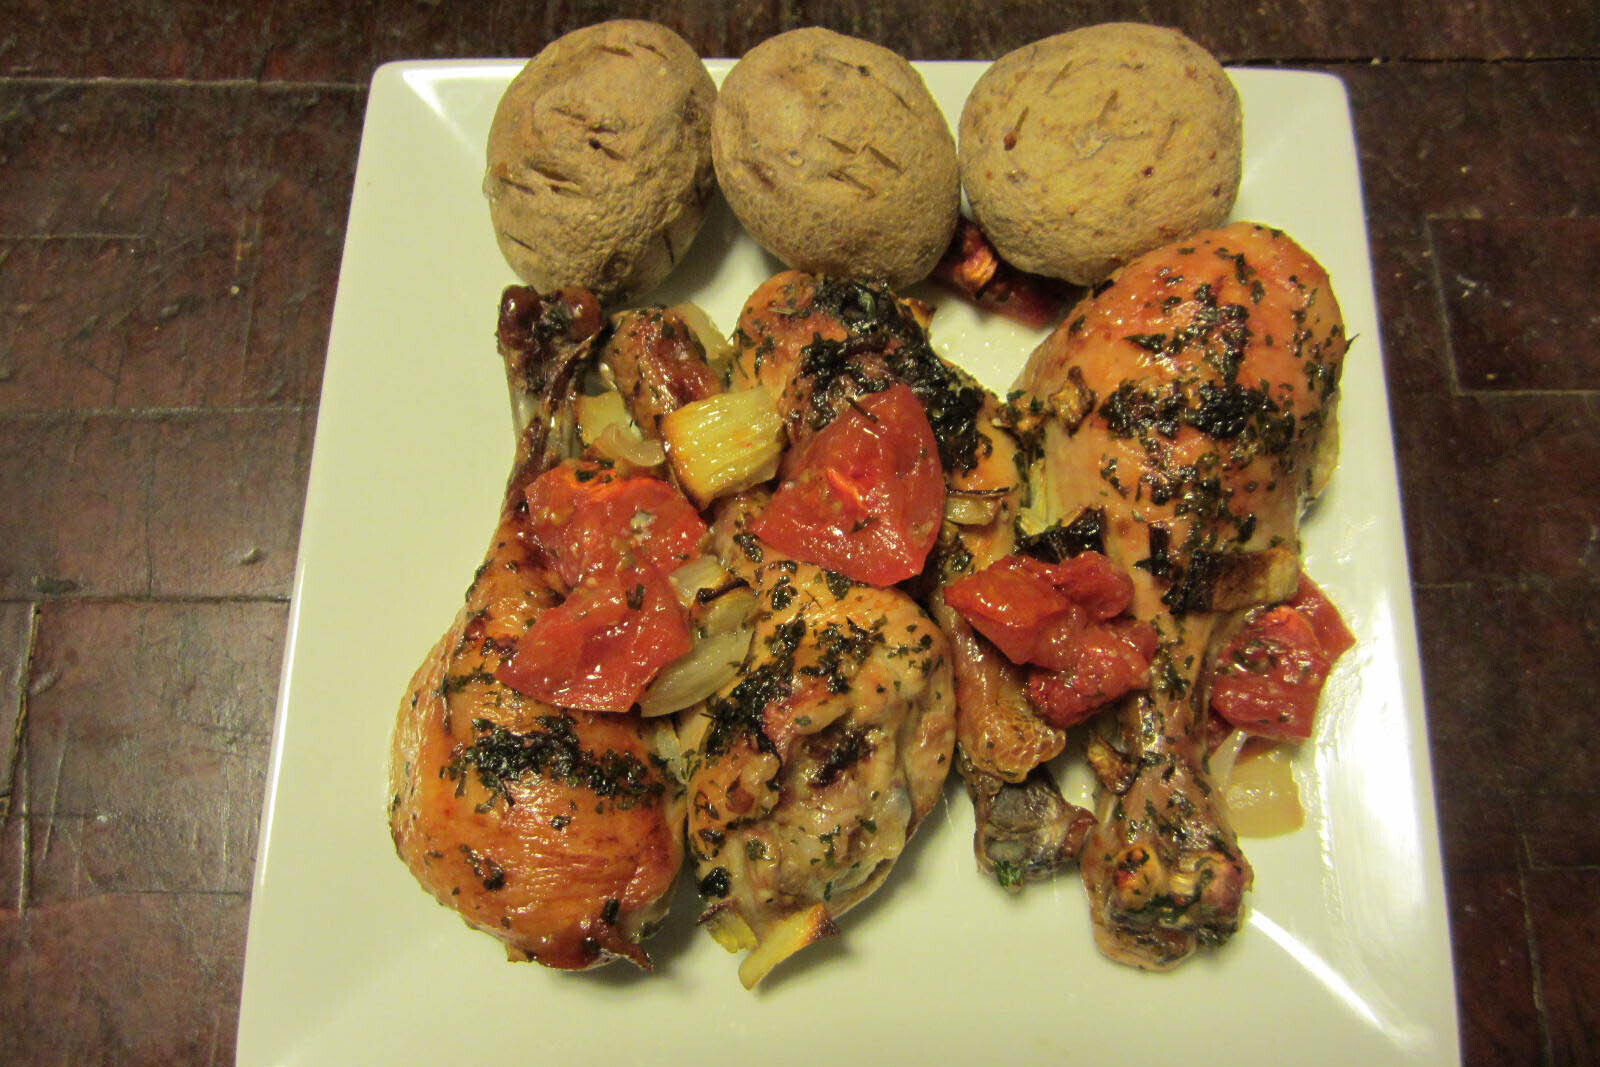 Chicken topped with tomato and onion with baked potatoes on the side